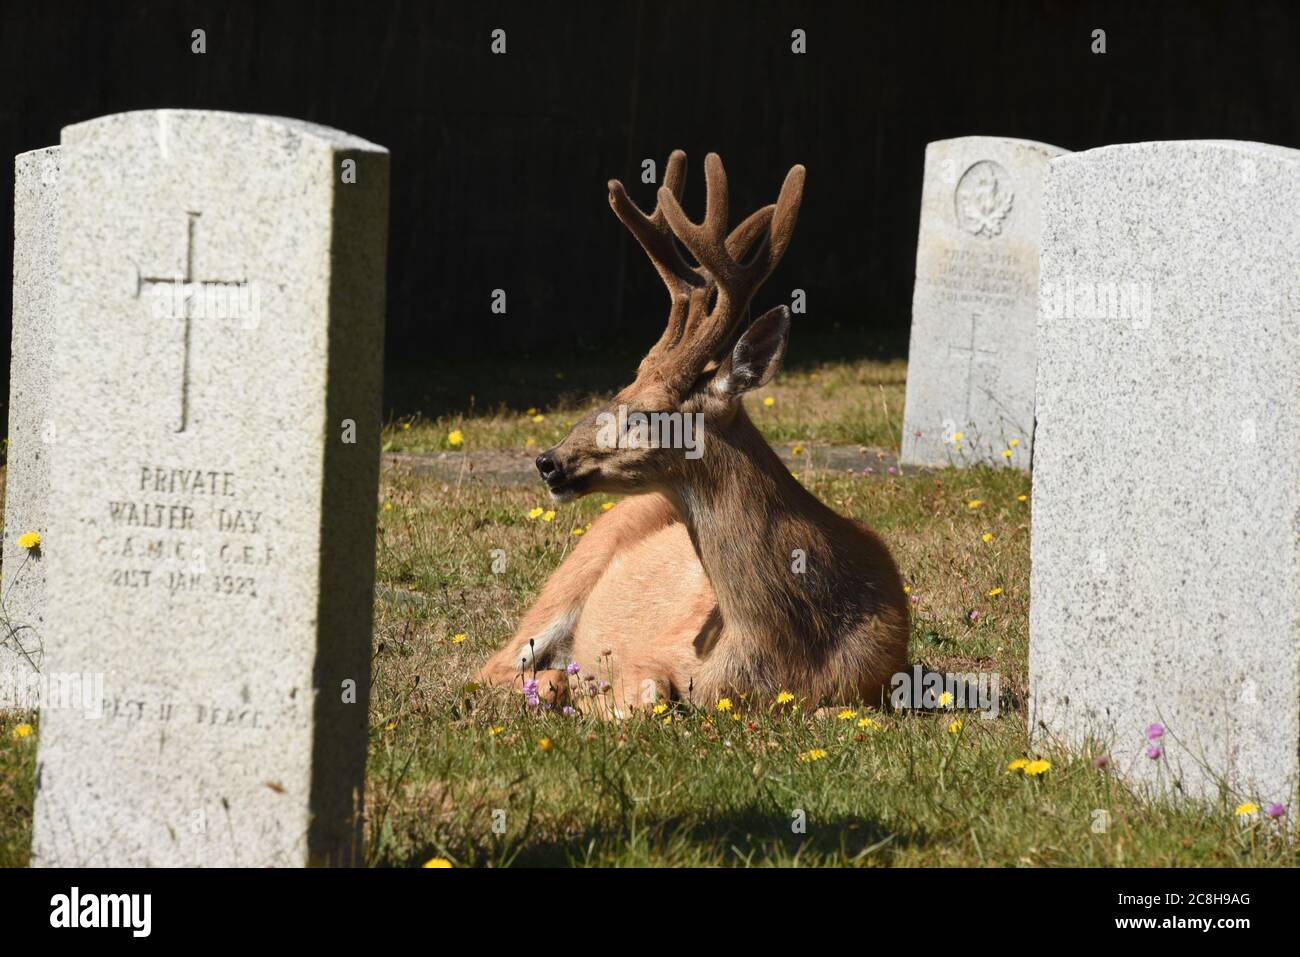 Victoria, British Columbia, Canada 24 July 2020  - A buck deer with antlers enjoys the sun between military headstones in the historic Ross Bay Cemetery. Deer encroaching on residential and urban areas are an ongoing problem for the greater Victoria region. . Alamy Live News/Don Denton Credit: Don Denton/Alamy Live News Stock Photo